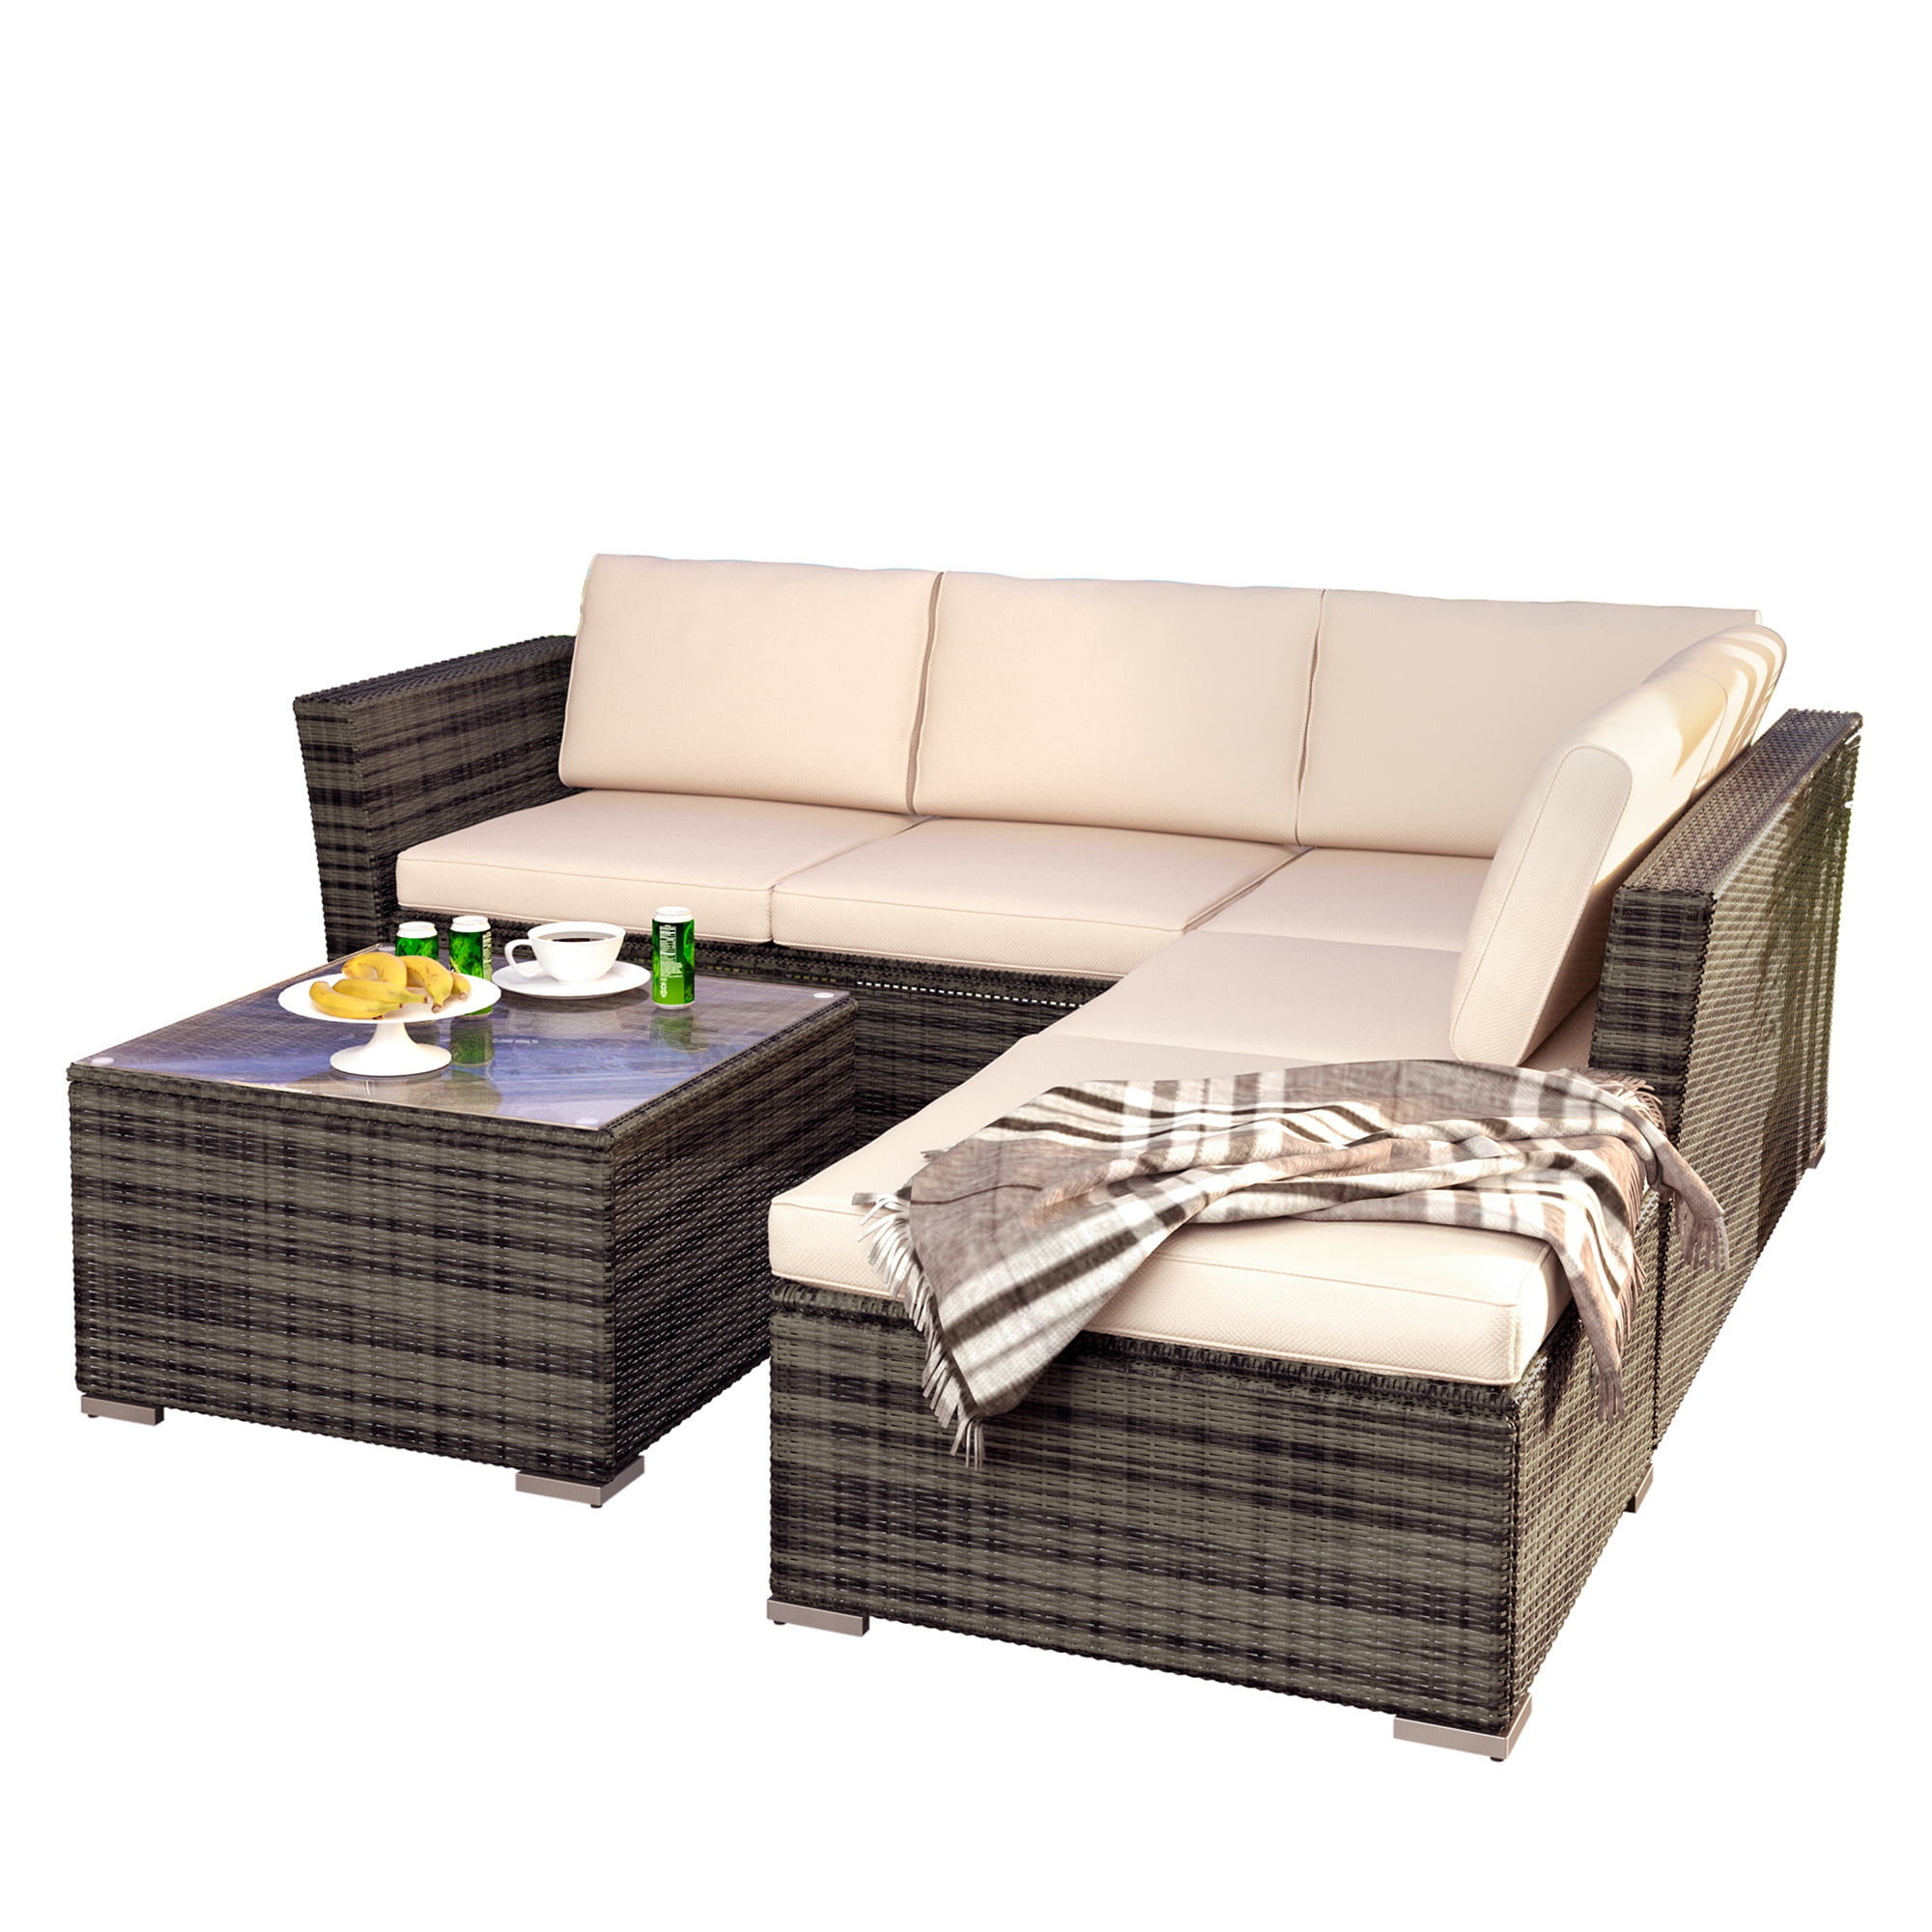 4 Set 2 Brown & Beige Necessary Tools Patio Furniture VIEW&CO 4 PCs Outdoor Sofa Sectional Furniture Set PE Rattan Wicker Cushion Conversation Sets with Sofa & Glass Coffee Table 